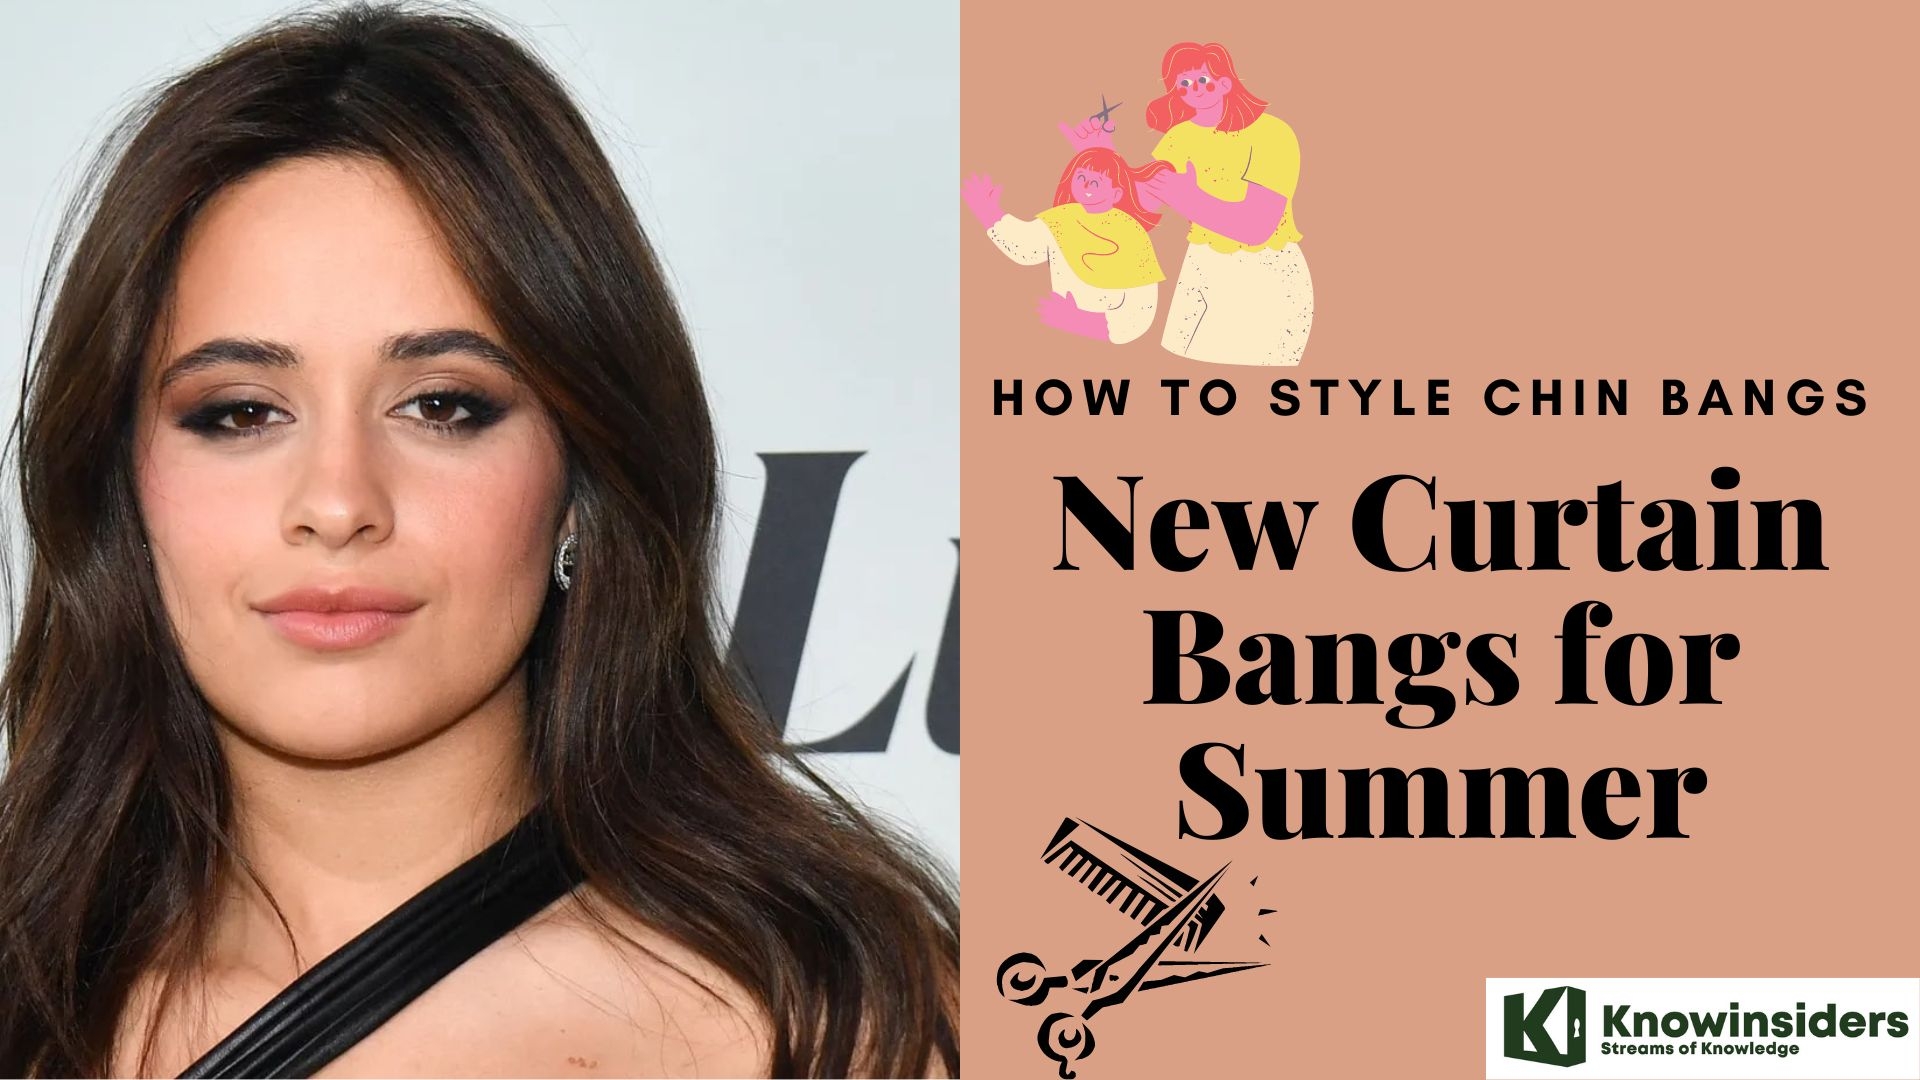 How to Style "Chin Bangs" - New Curtain Bangs for Summer